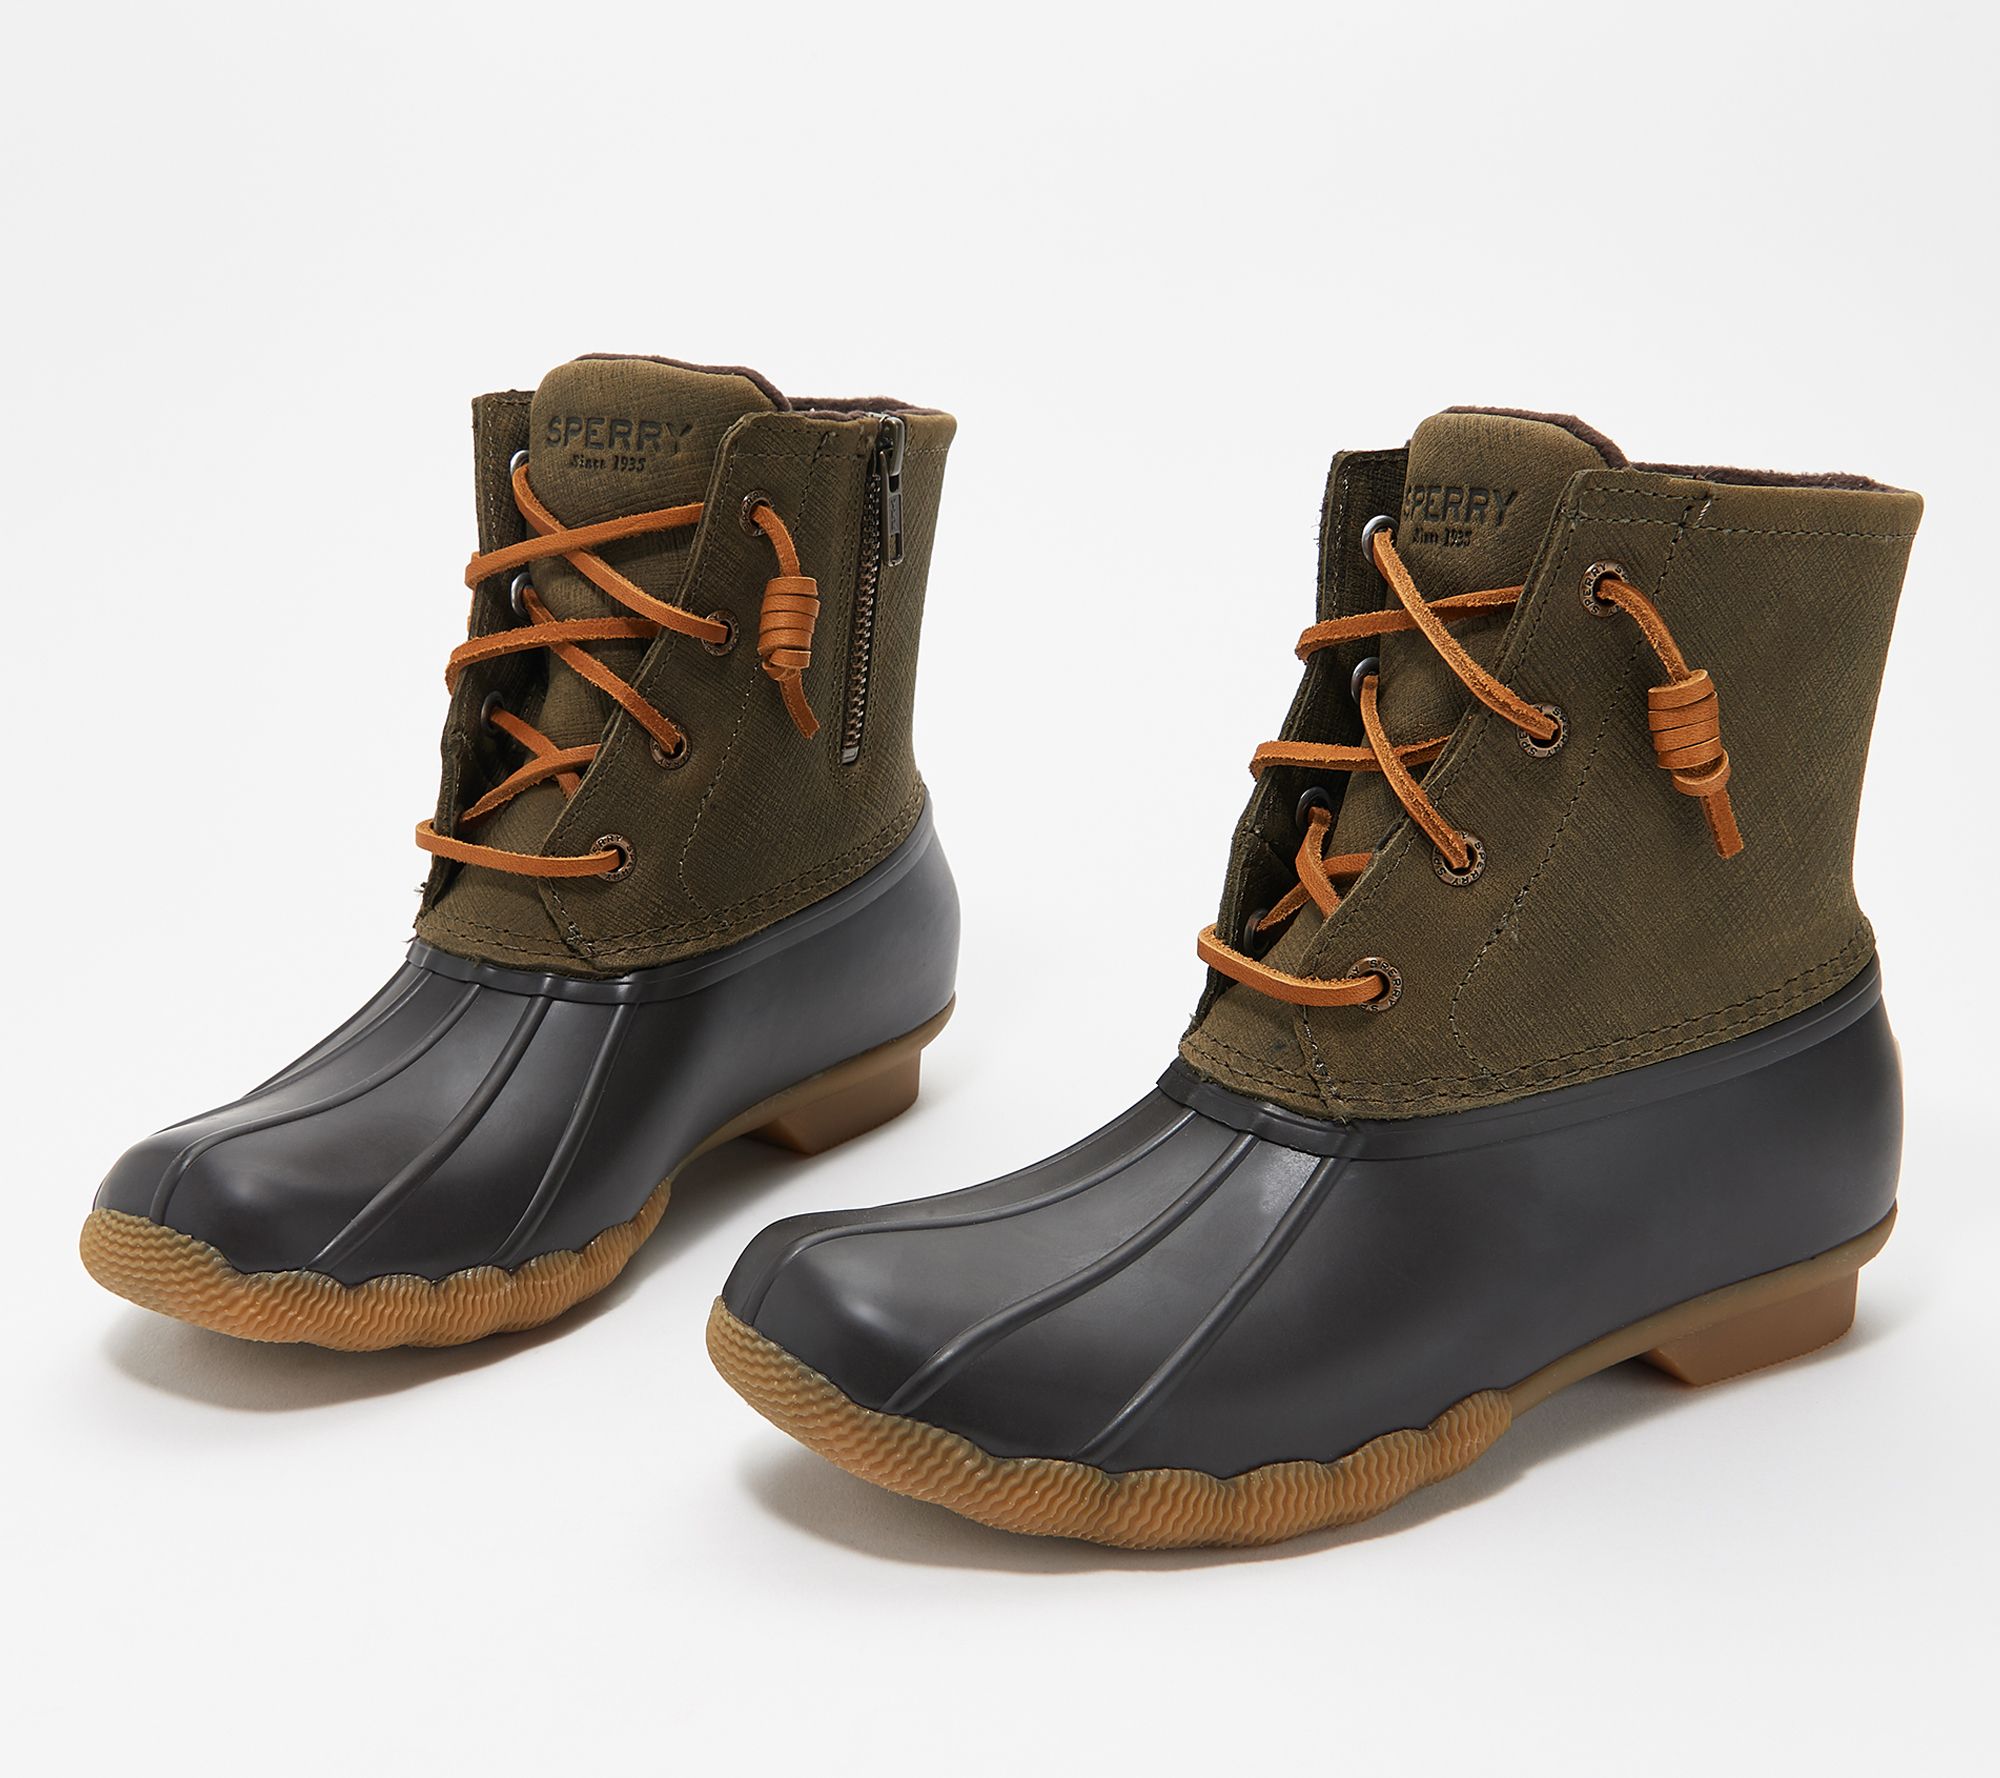 totes surface men's water resistant winter duck boots